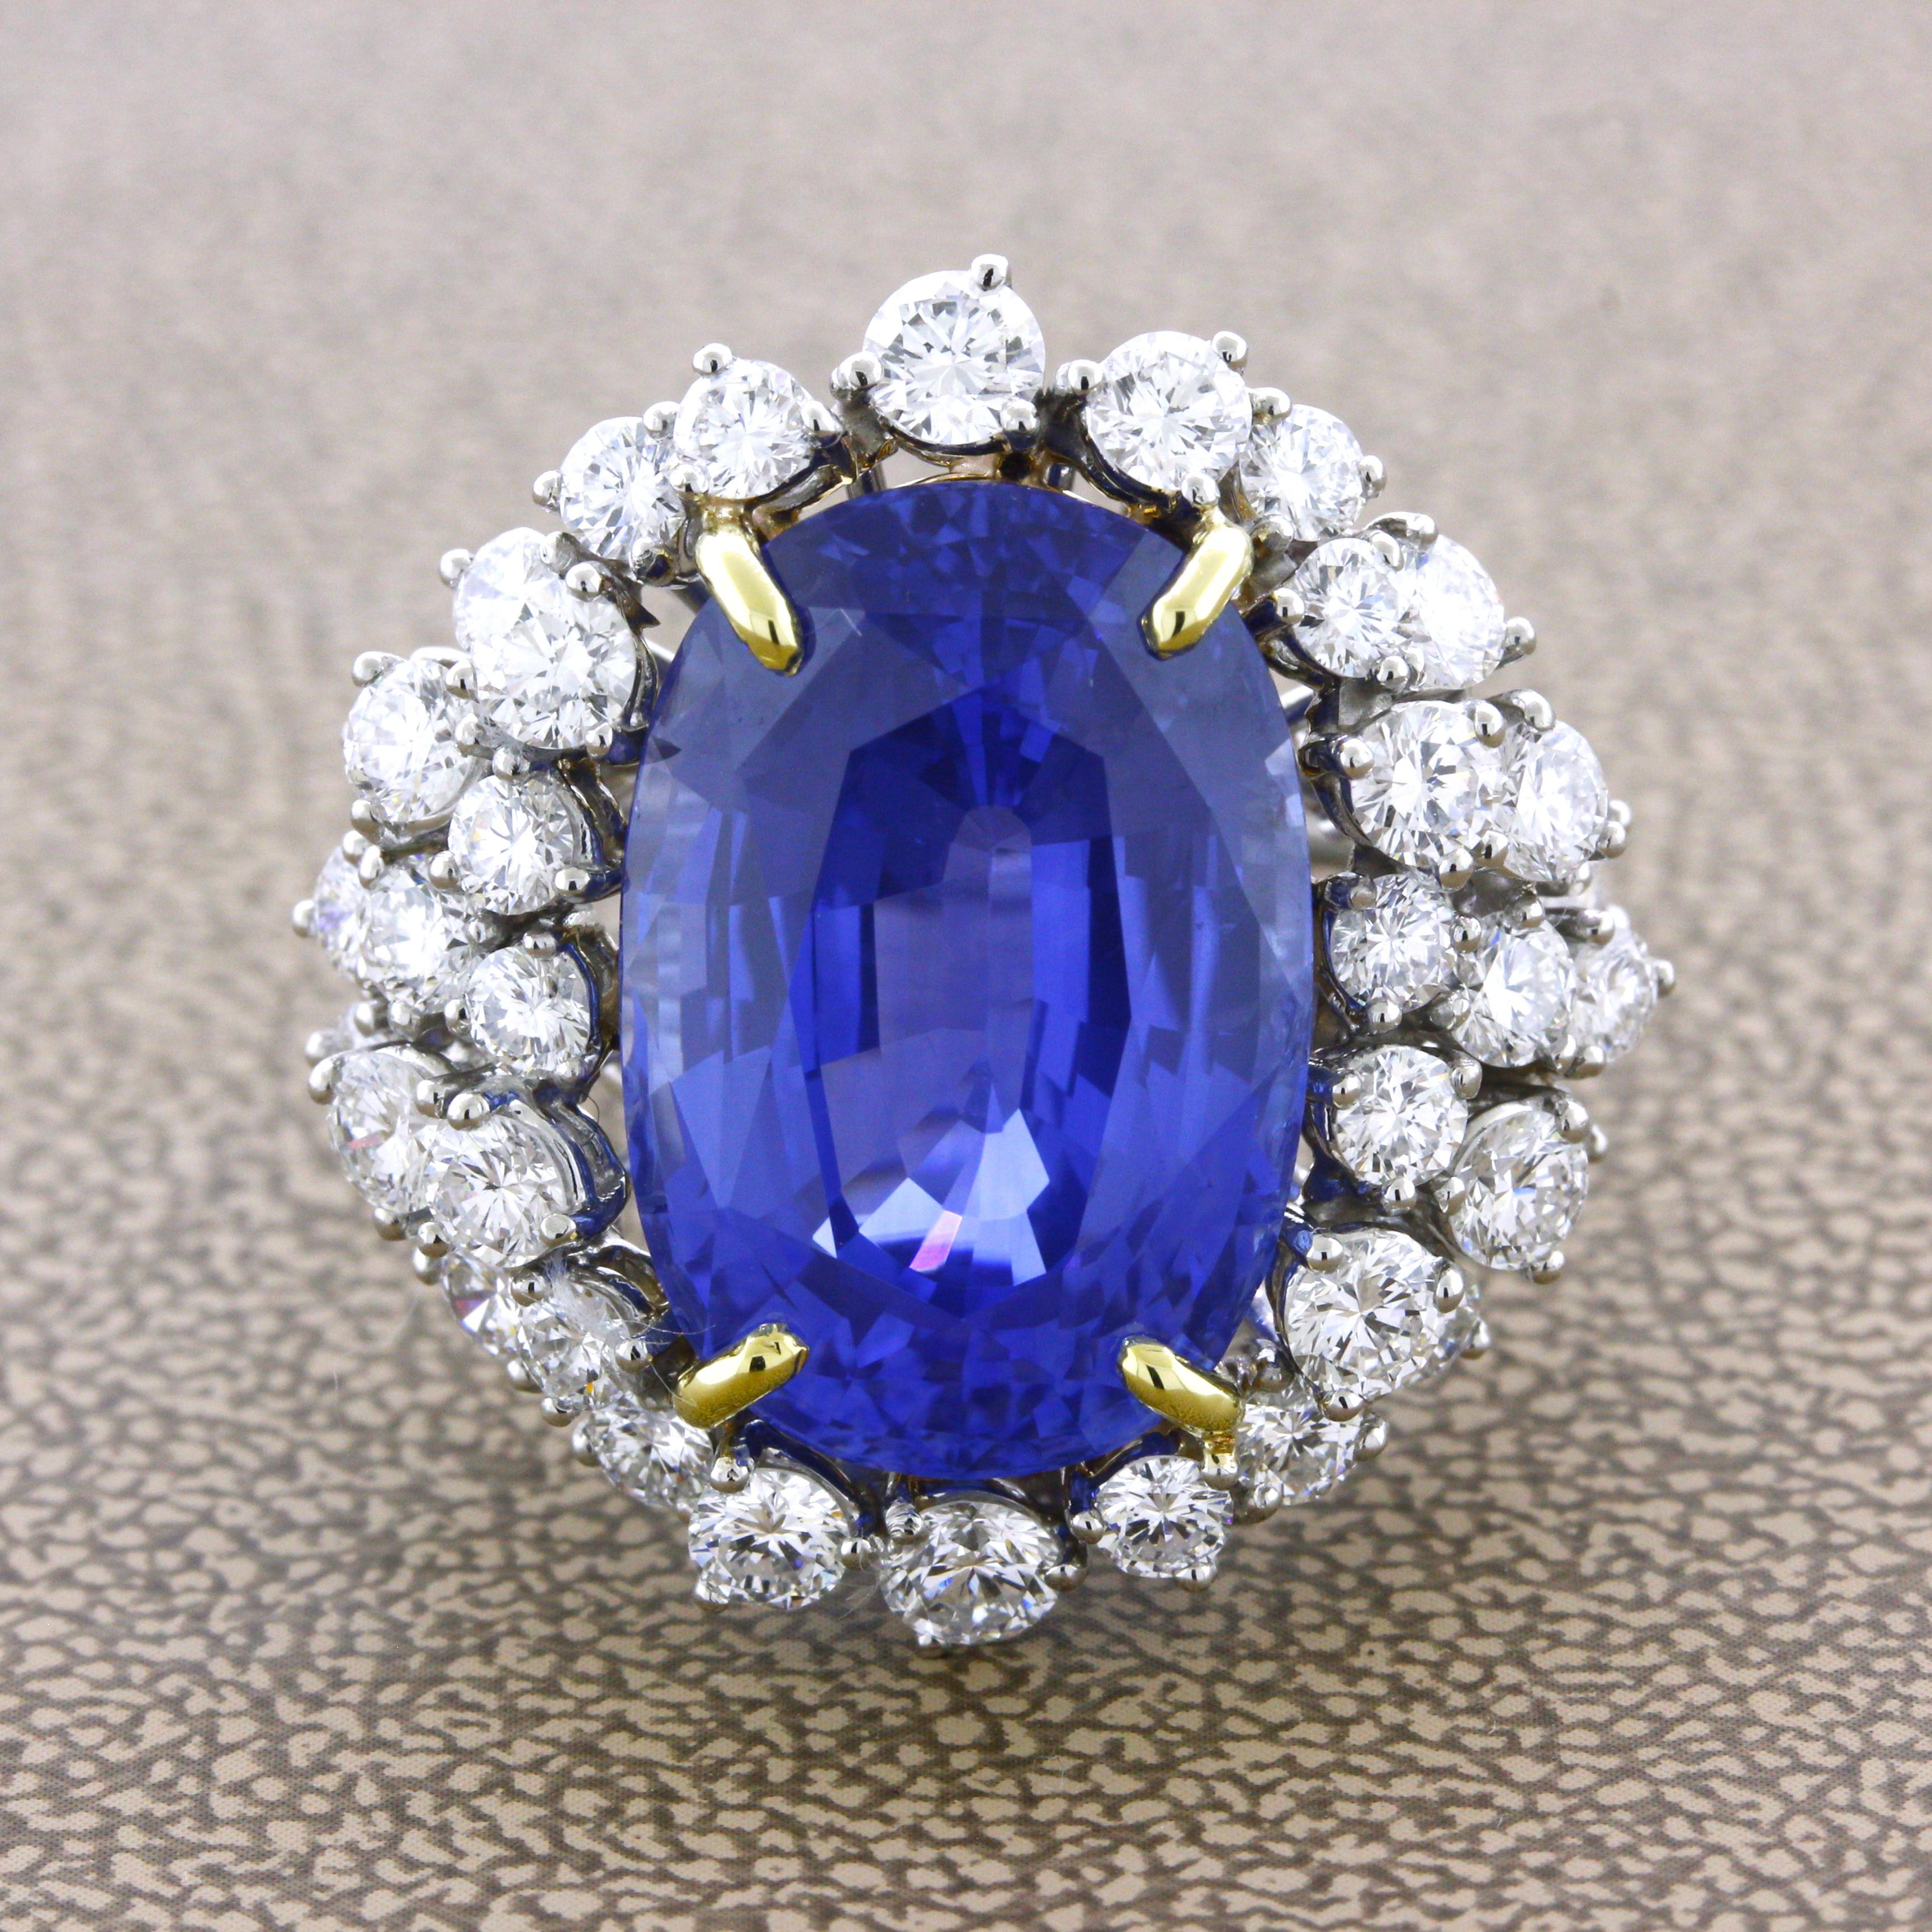 A special gemstone is set in the middle of this gorgeous platinum cocktail ring. It is a gem 20.17 carat Ceylon sapphire which has been GIA Certified. What makes this stone so special is the combination of its size, color, and clarity. It has a rich